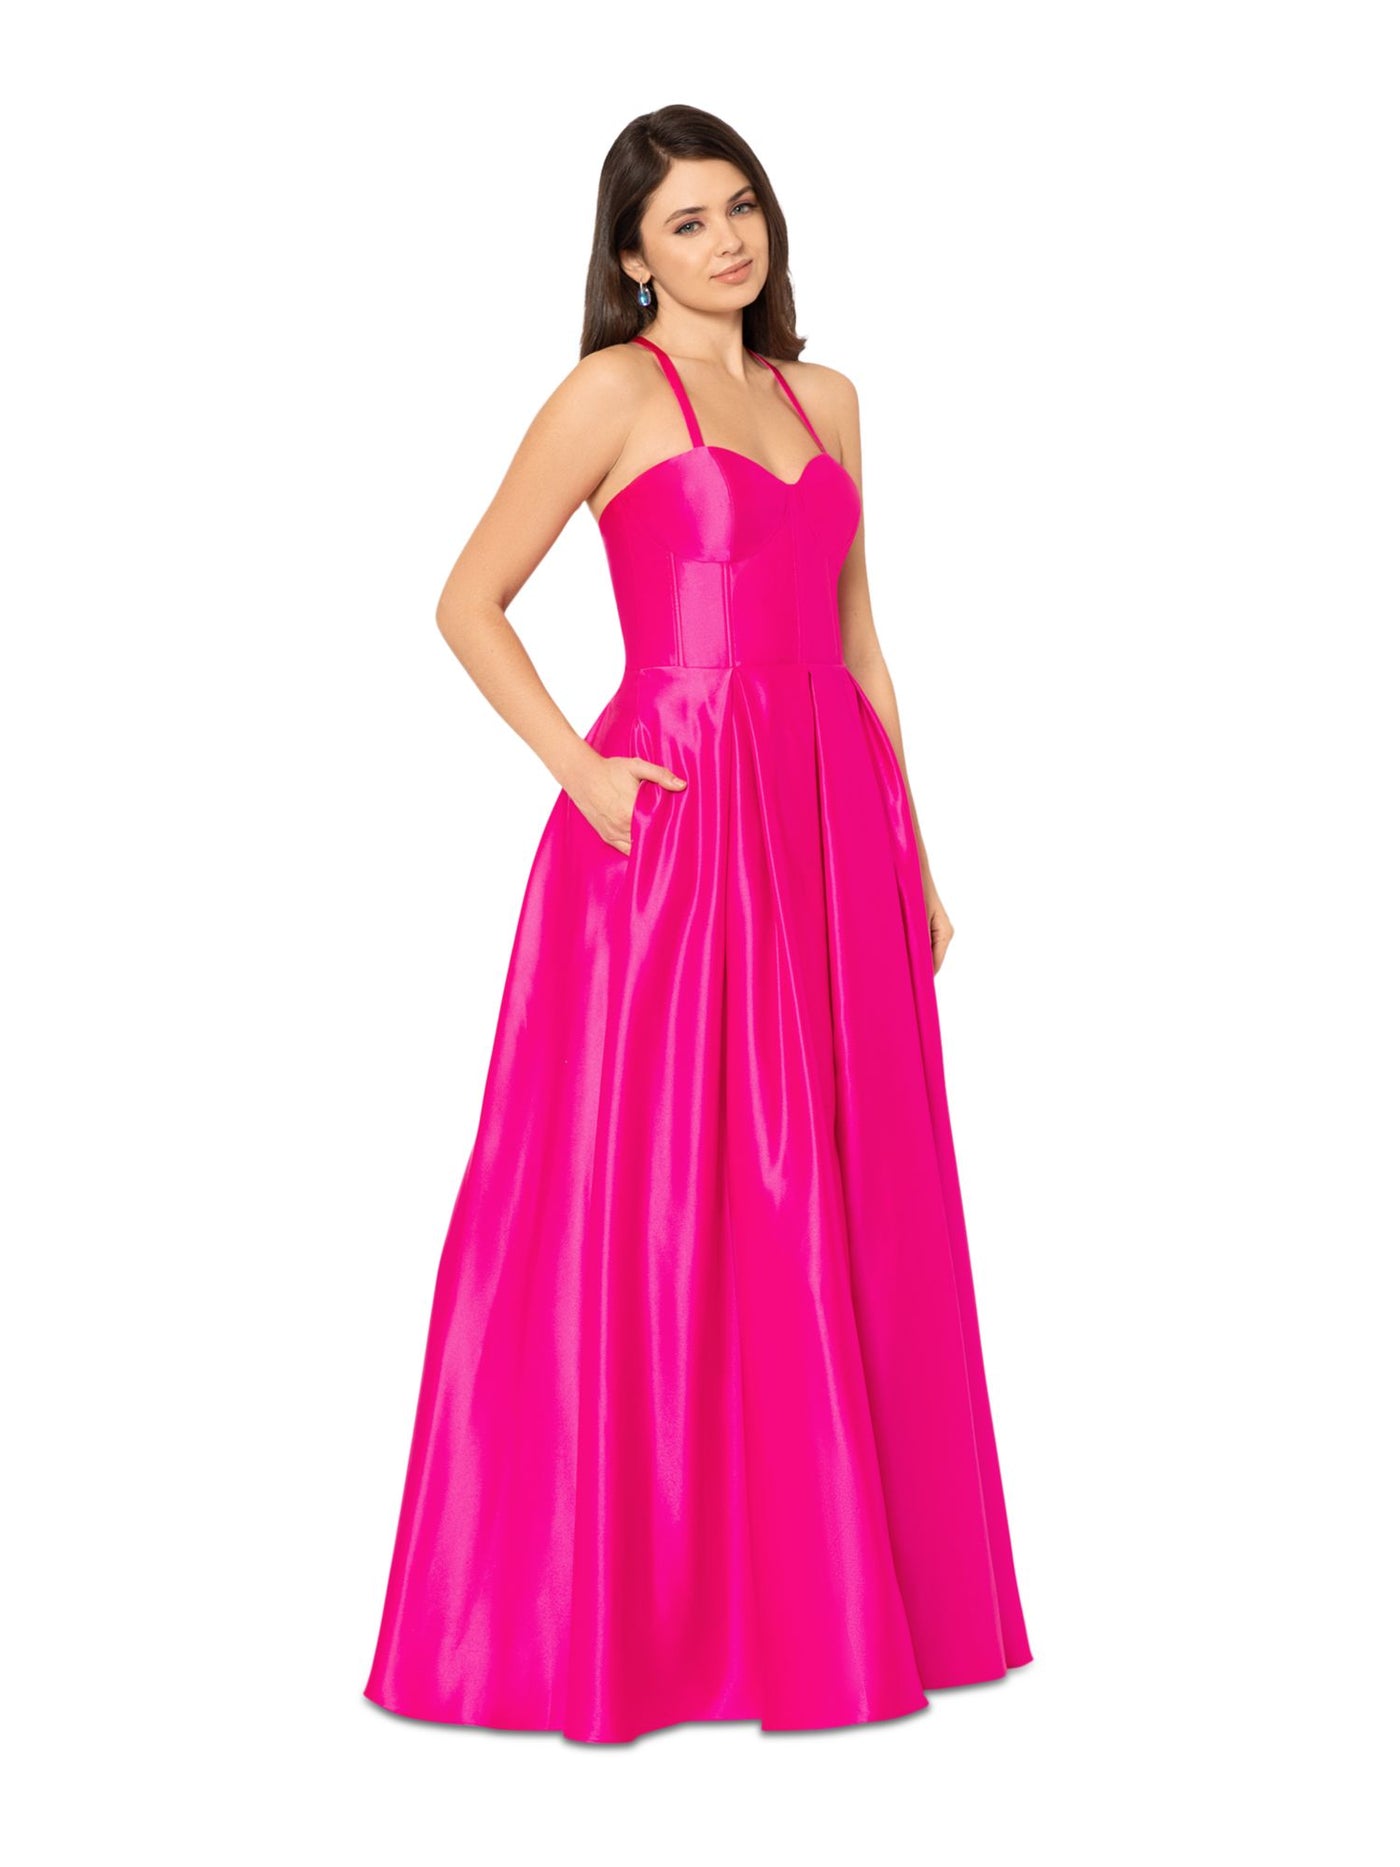 BLONDIE NITES Womens Pink Zippered Pocketed Lace-up Corset Bodice Lined Sleeveless Sweetheart Neckline Full-Length Formal Gown Dress Juniors 9